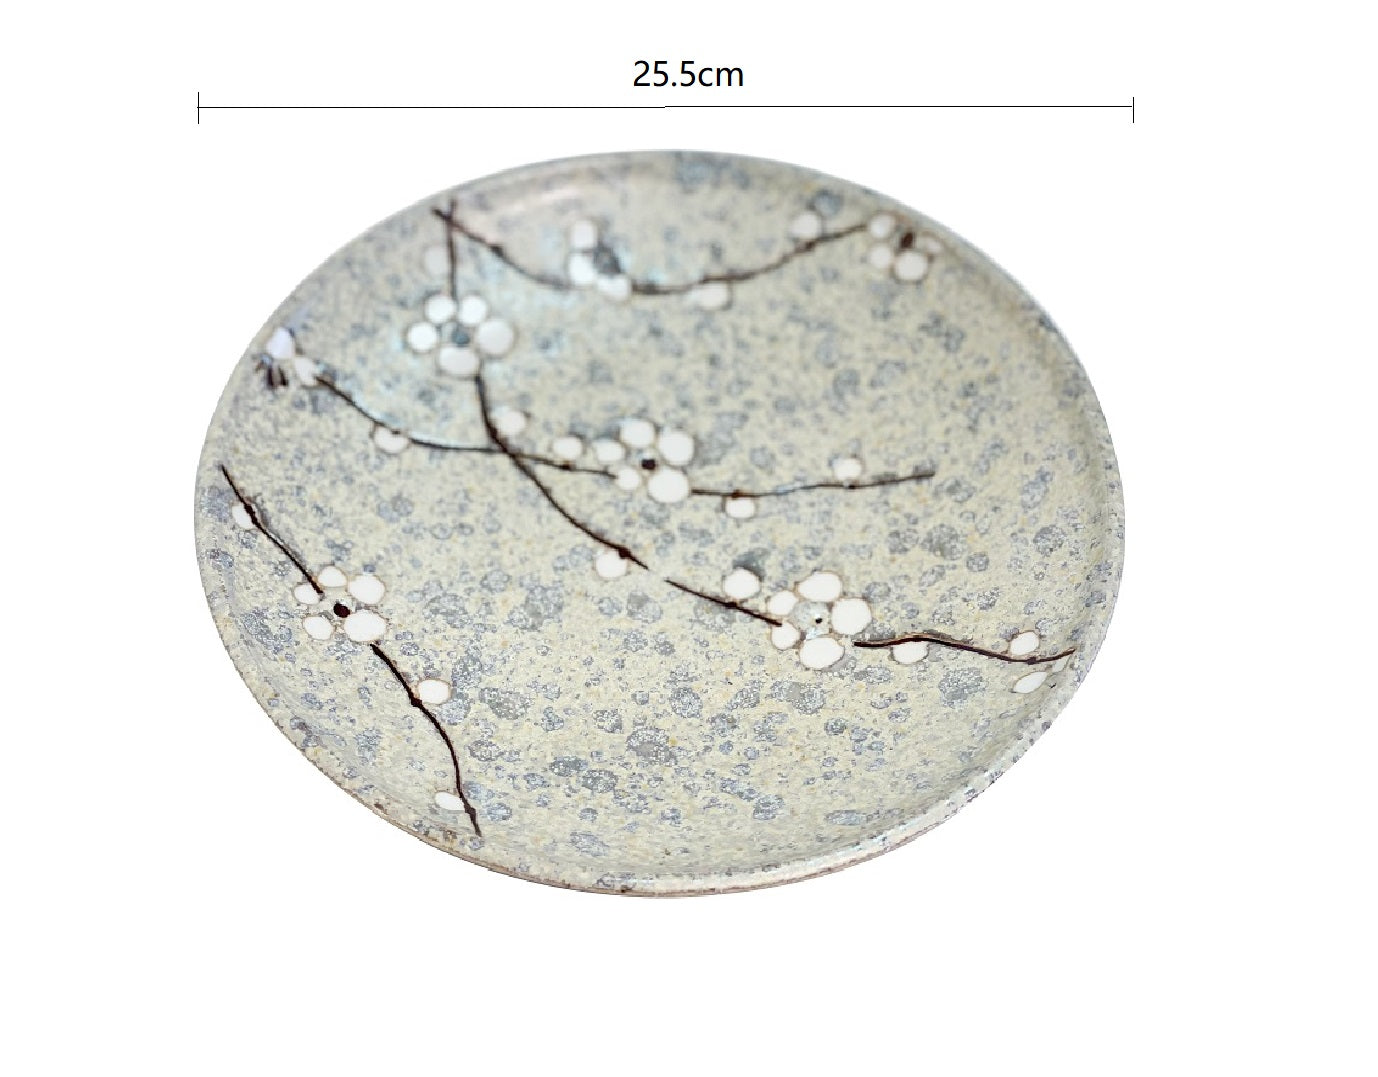 2023380 Early Spring 25.5*3.5cm Big Flat Plate